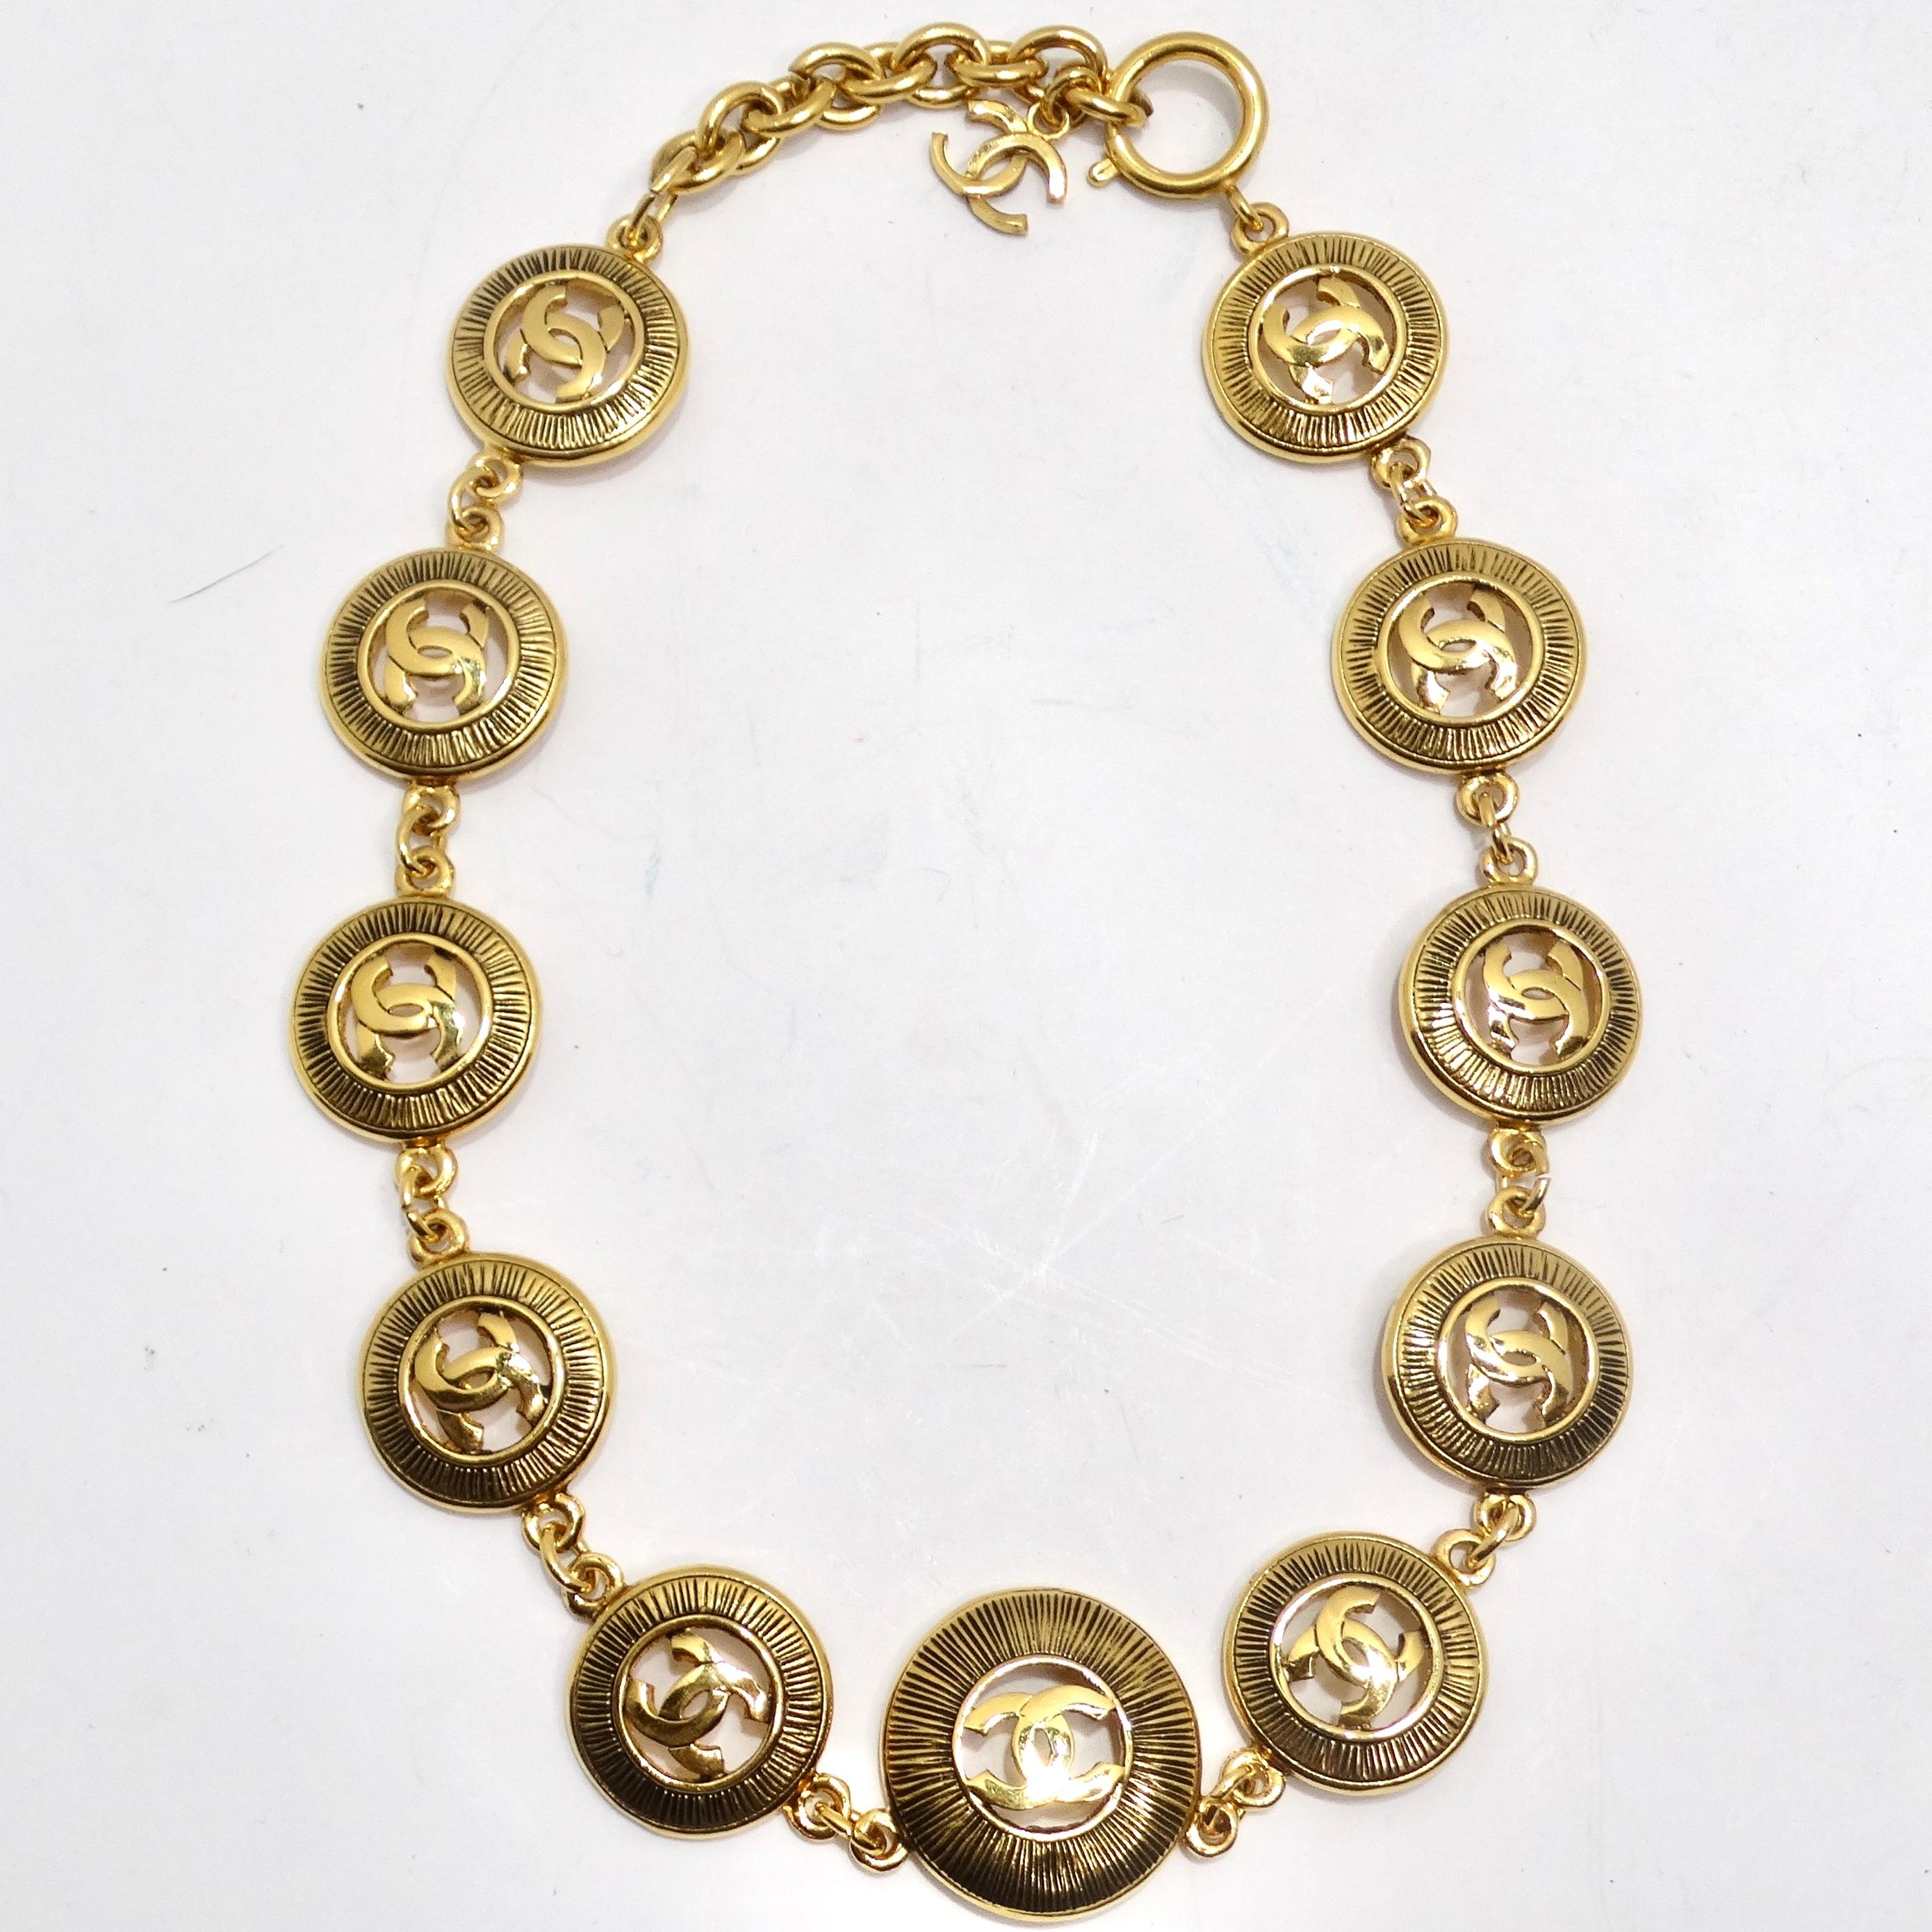 Introducing a stunning piece of vintage elegance, the Chanel 1980s Logo Medallion Necklace. This necklace features 11 gold-plated Chanel signature CC logo cutout charms with a sunburst pattern. The iconic interlocking 'C' logos are a symbol of